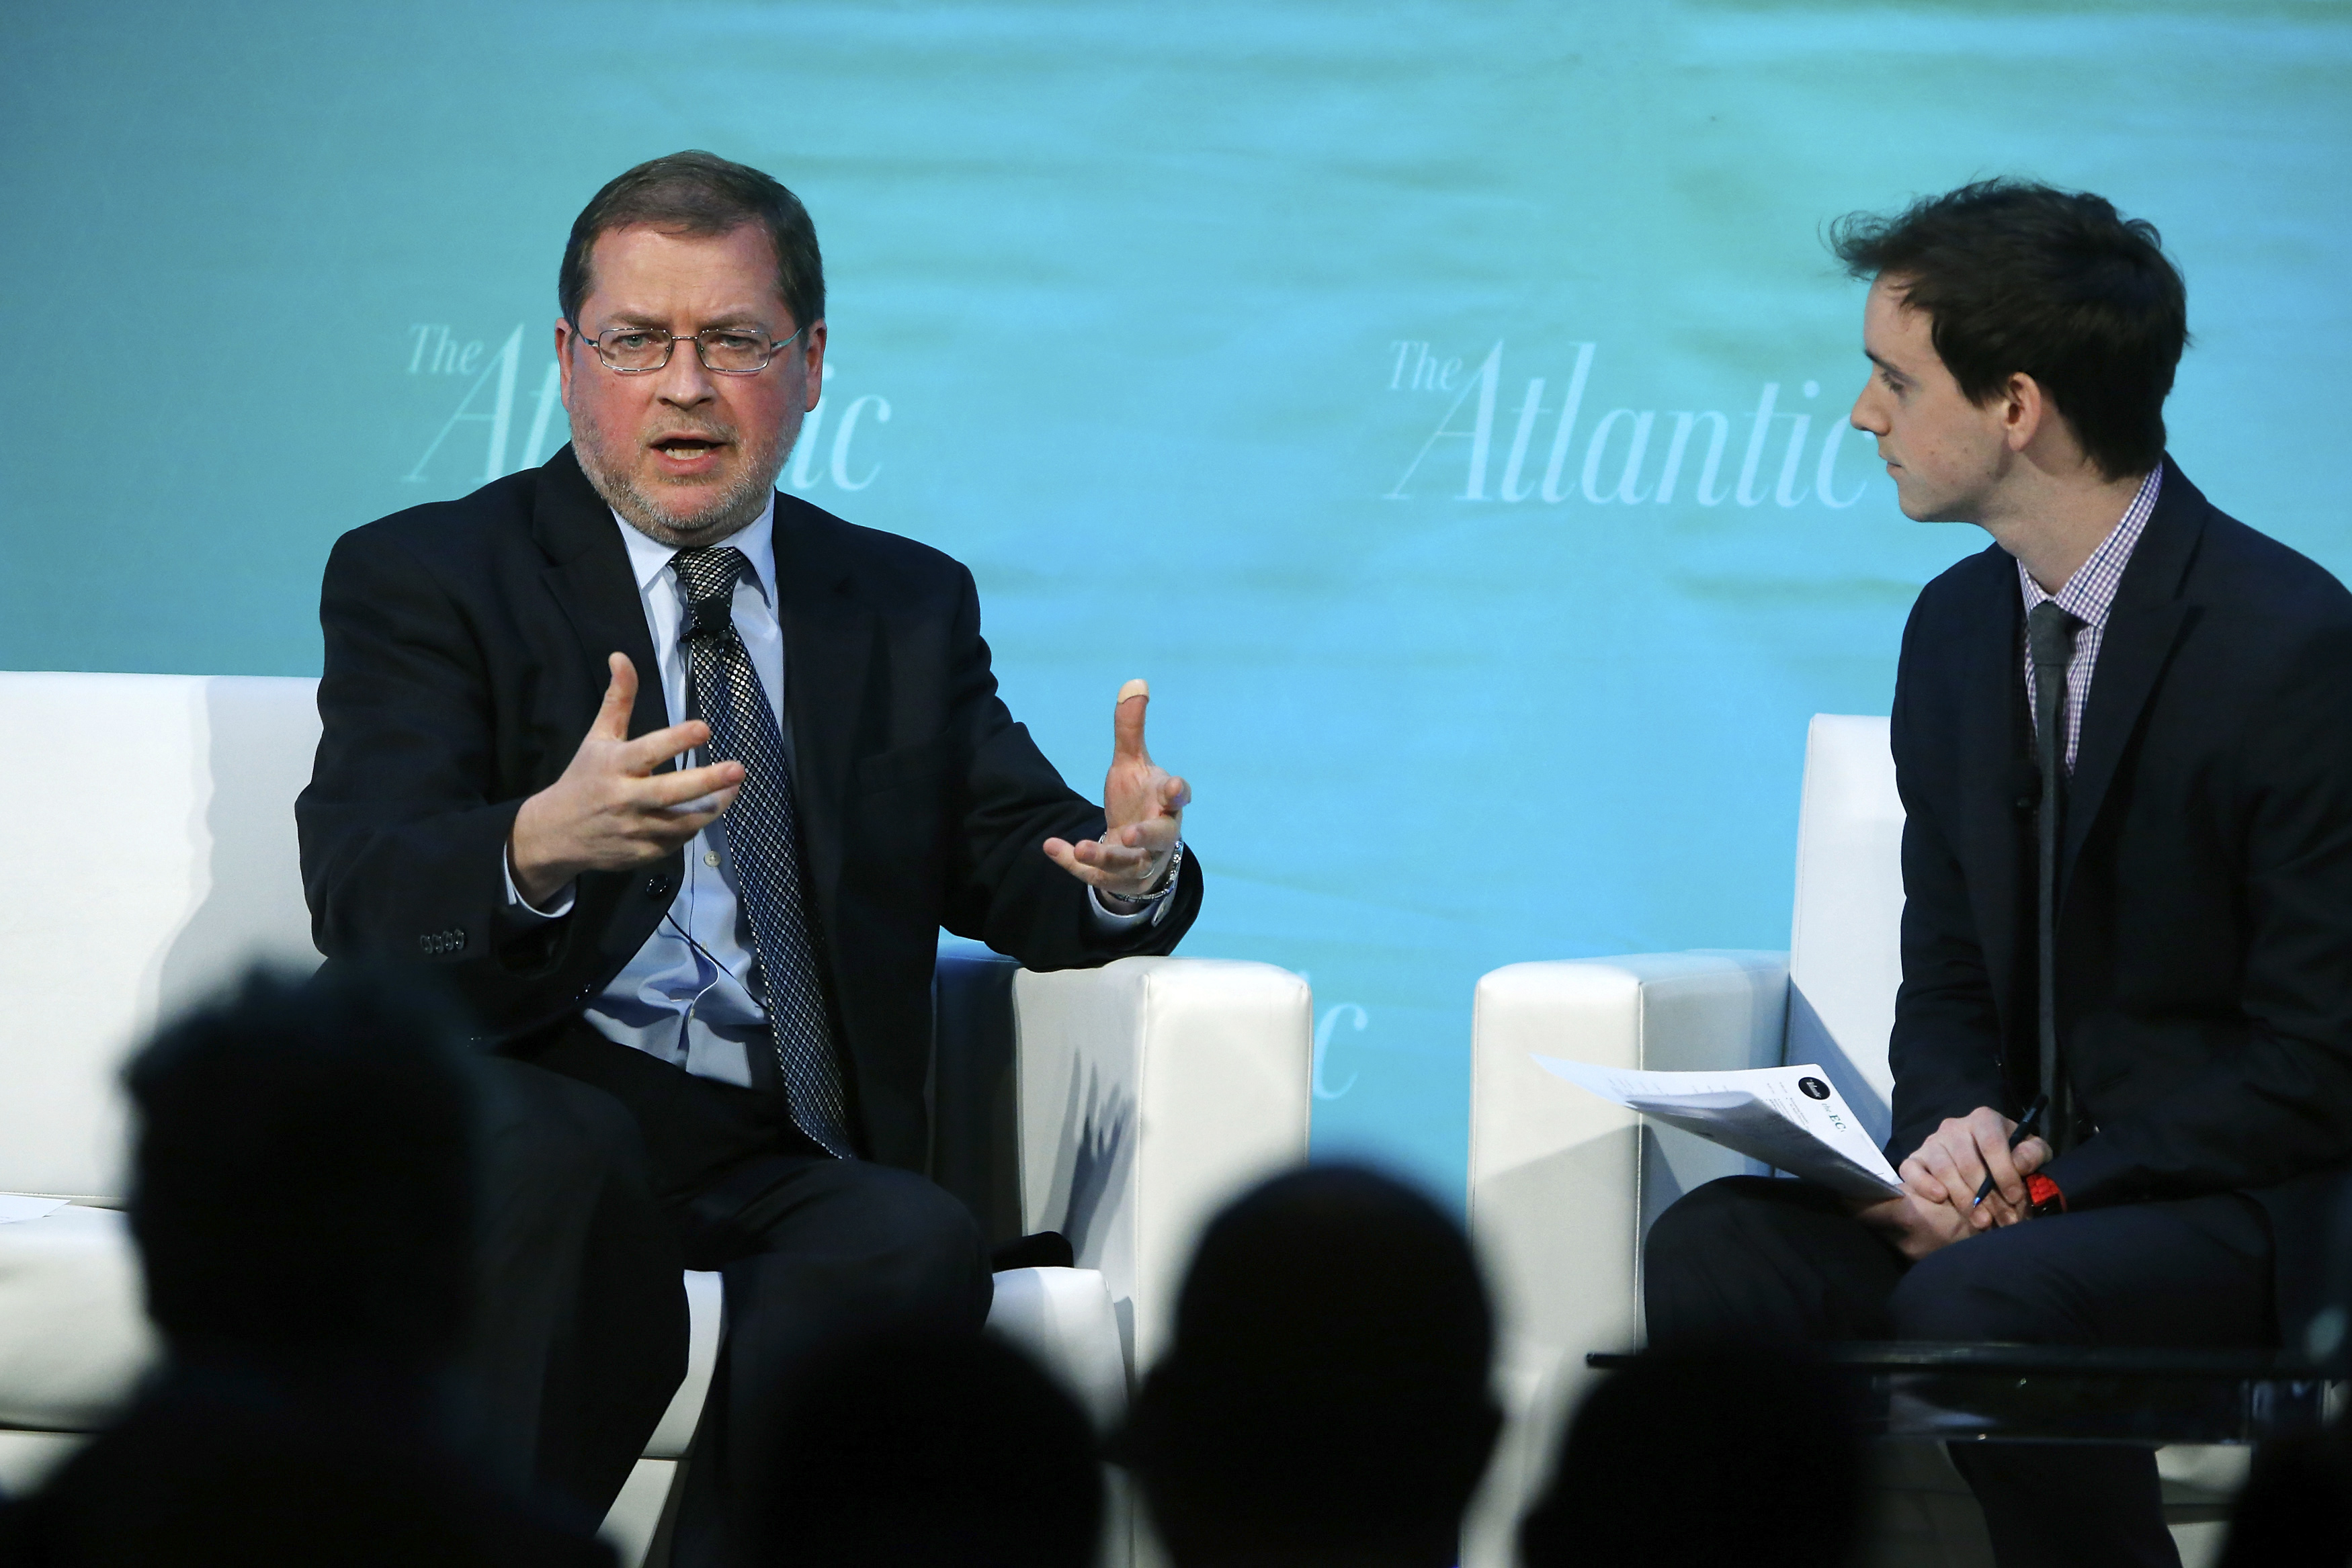 Americans for Tax Reform Founder and President Norquist speaks during an on-stage interview with The Atlantic's Senior Editor Thompson at The Atlantic Economy Summit in Washington